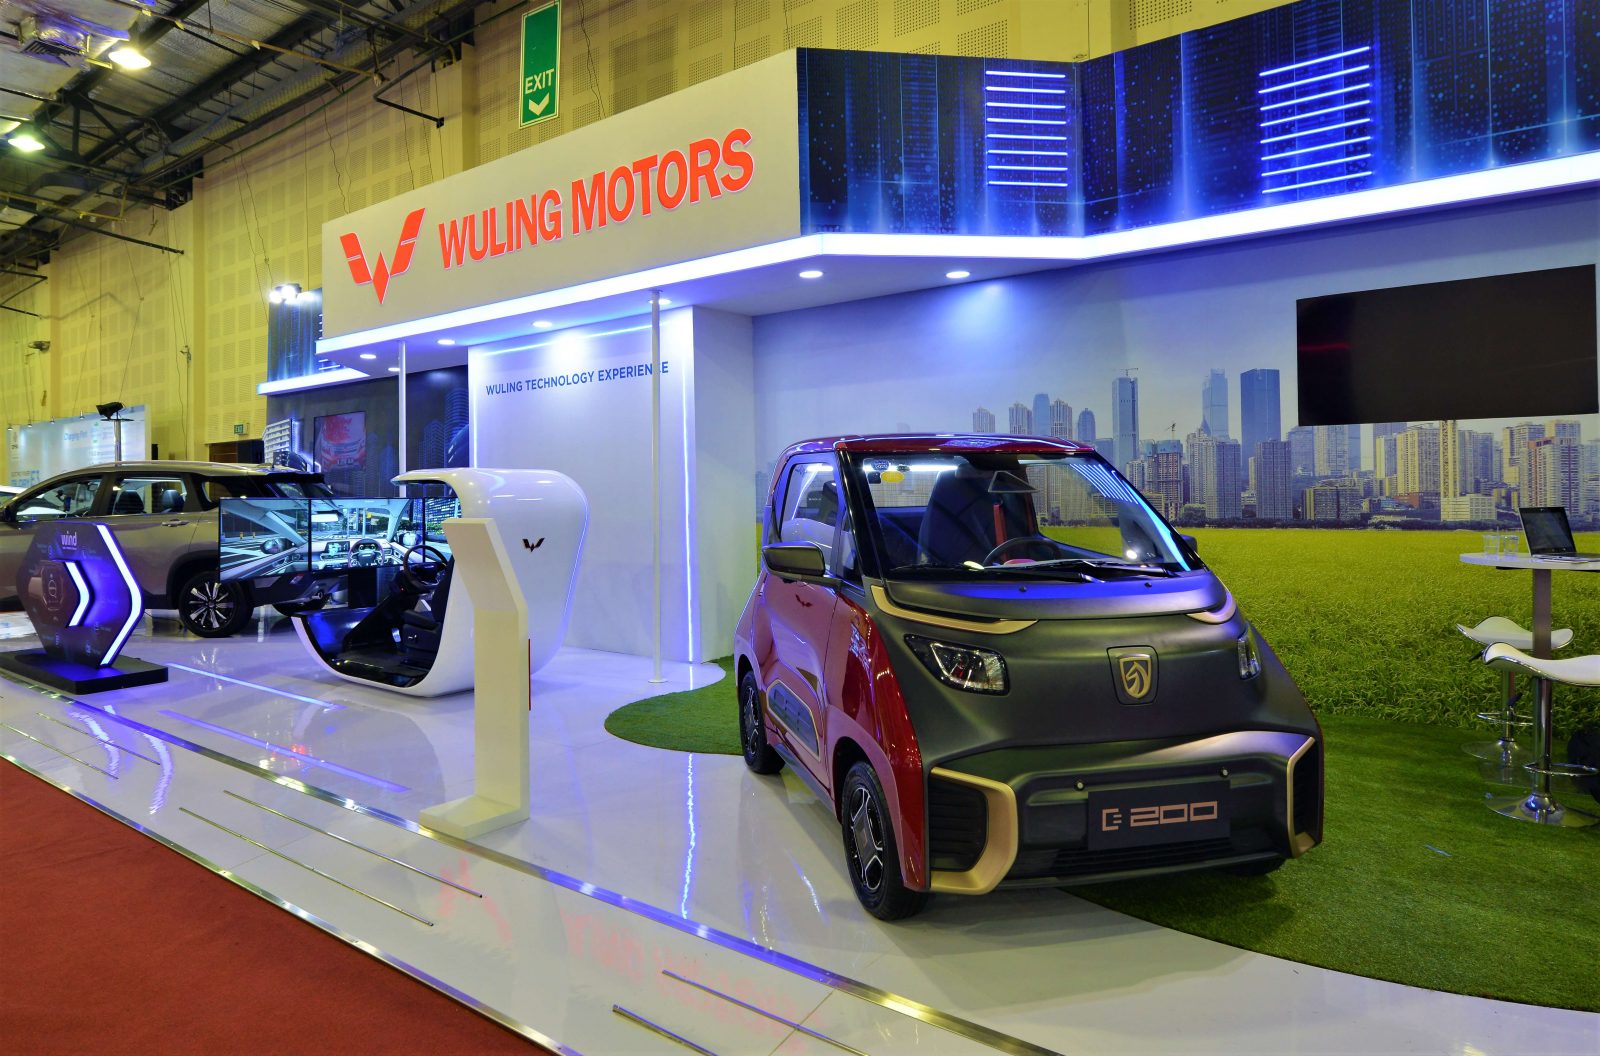 Image Wuling Participates in Indonesia Electric Motor Show 2019